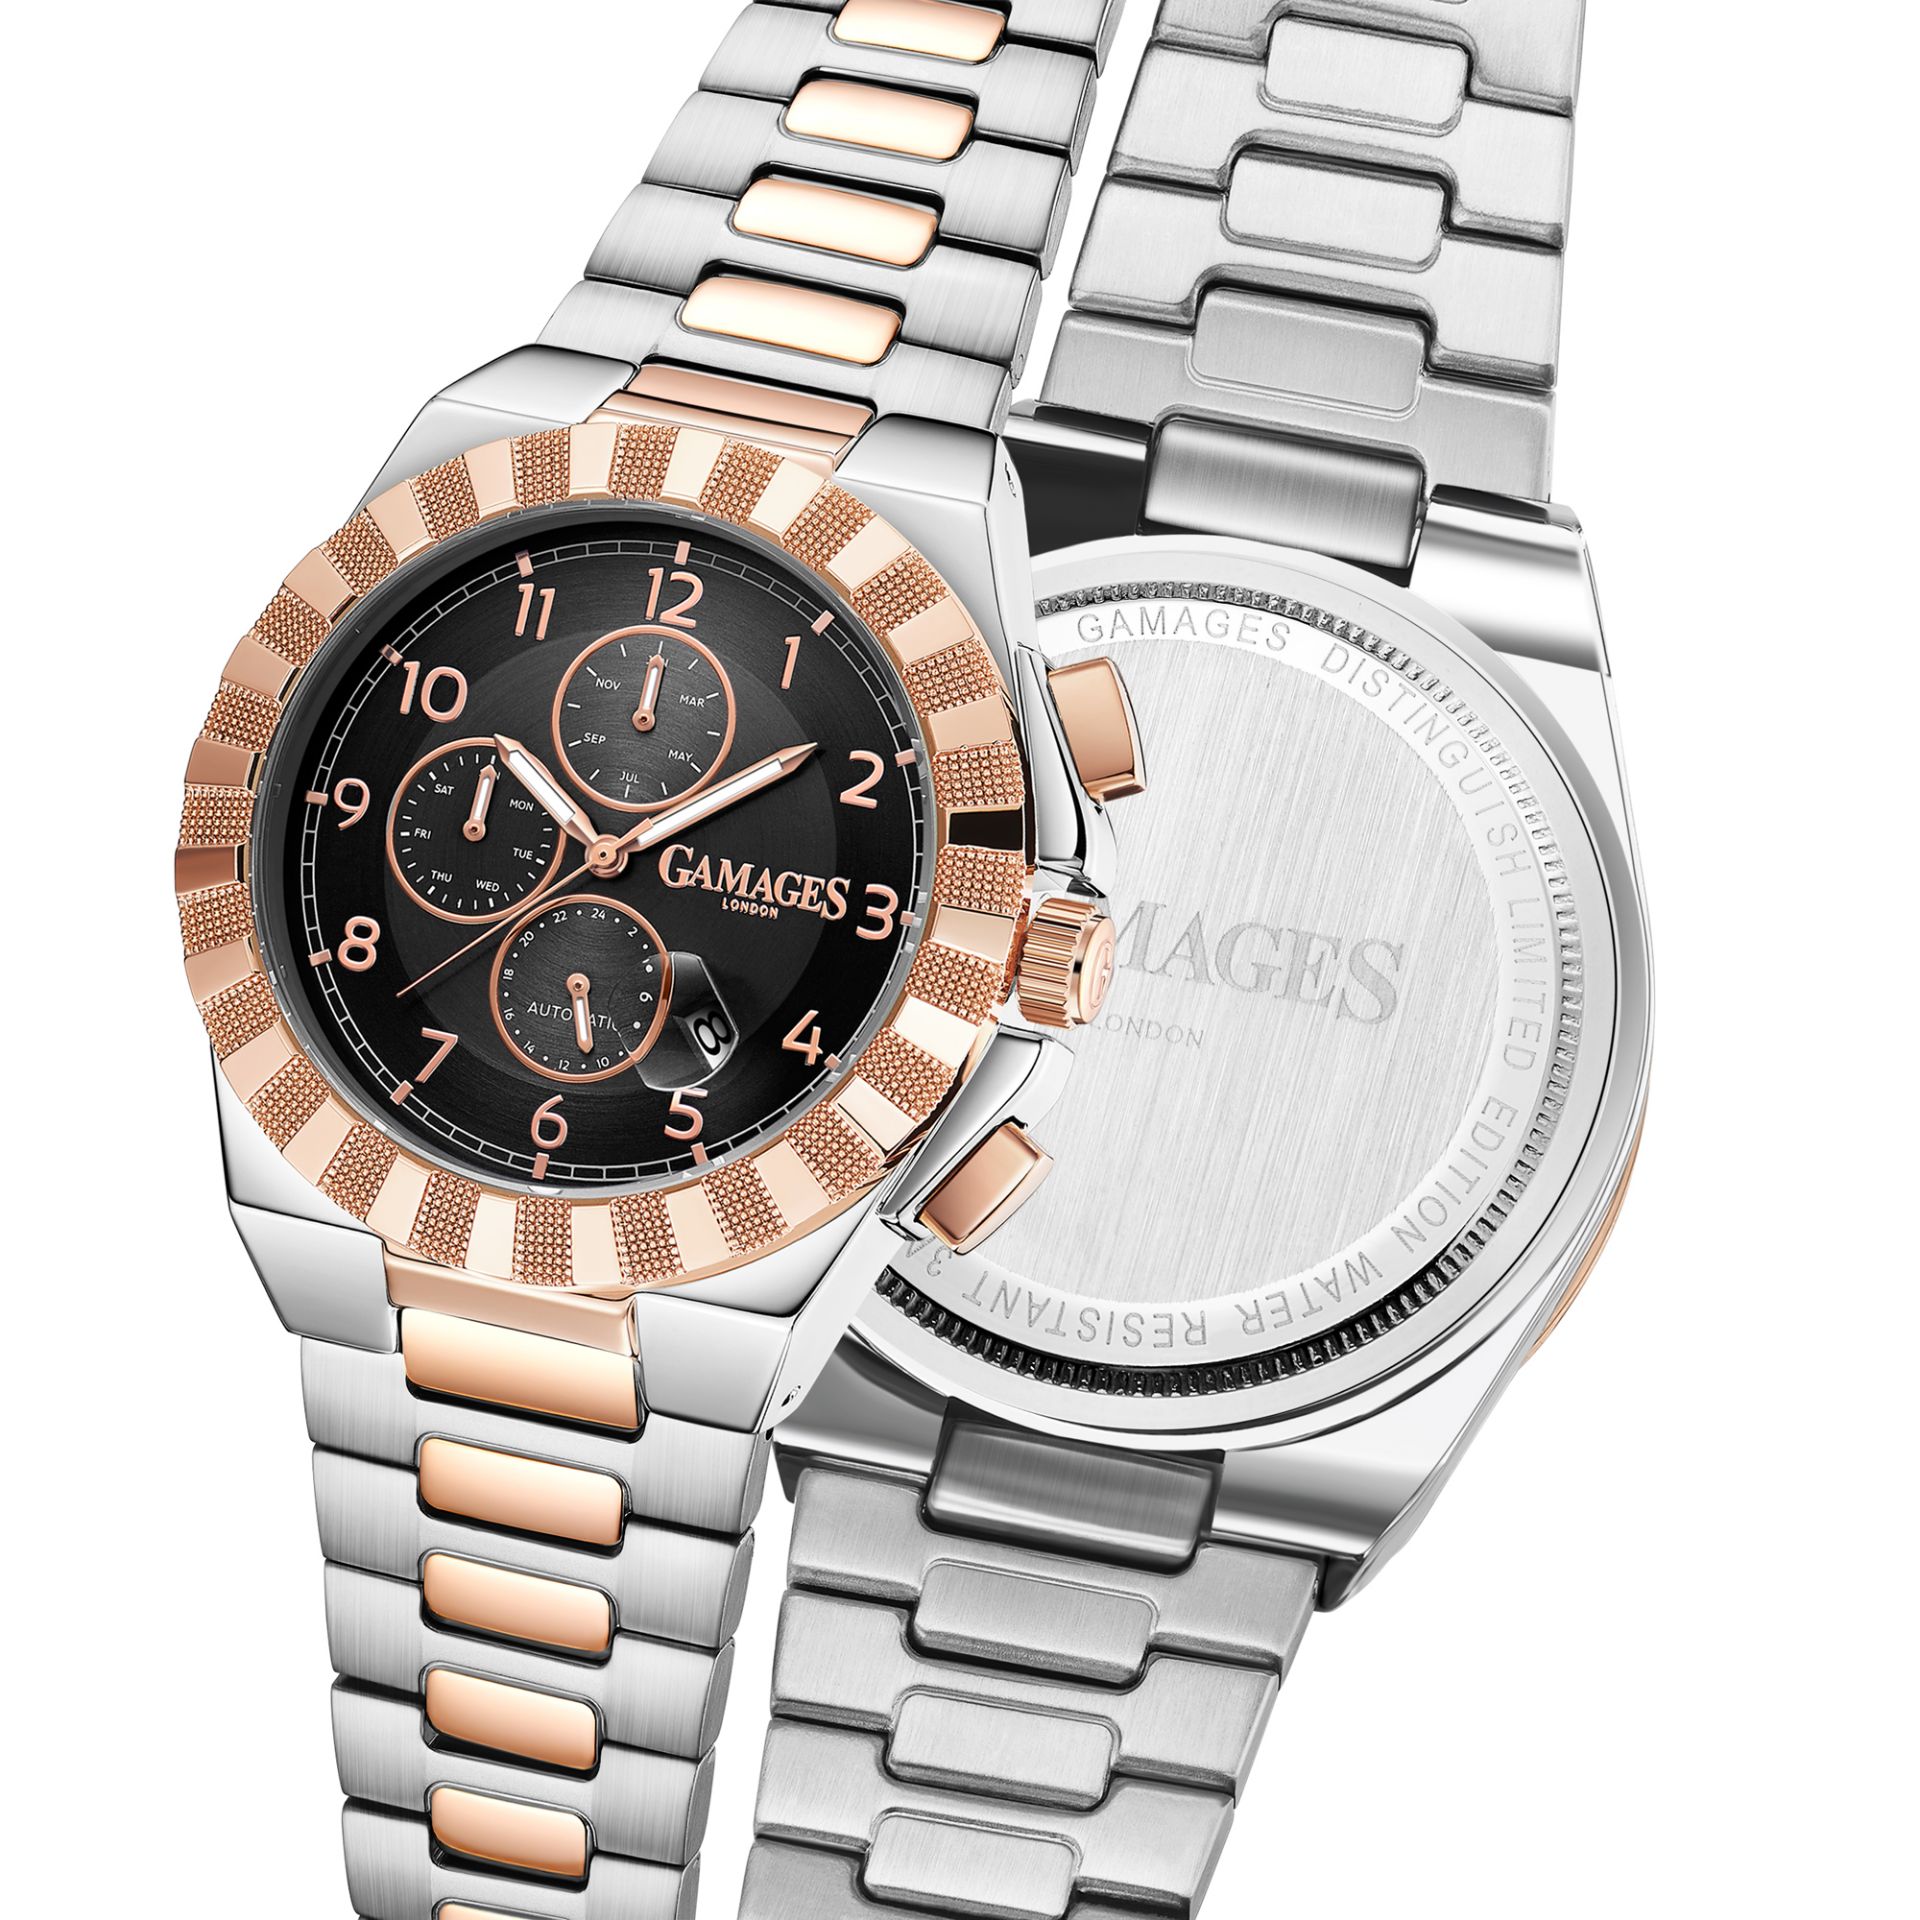 Ltd Ed Hand Assembled Gamages Distinguish Automatic Two Tone – 5 Year Warranty & Free Delivery - Image 2 of 5